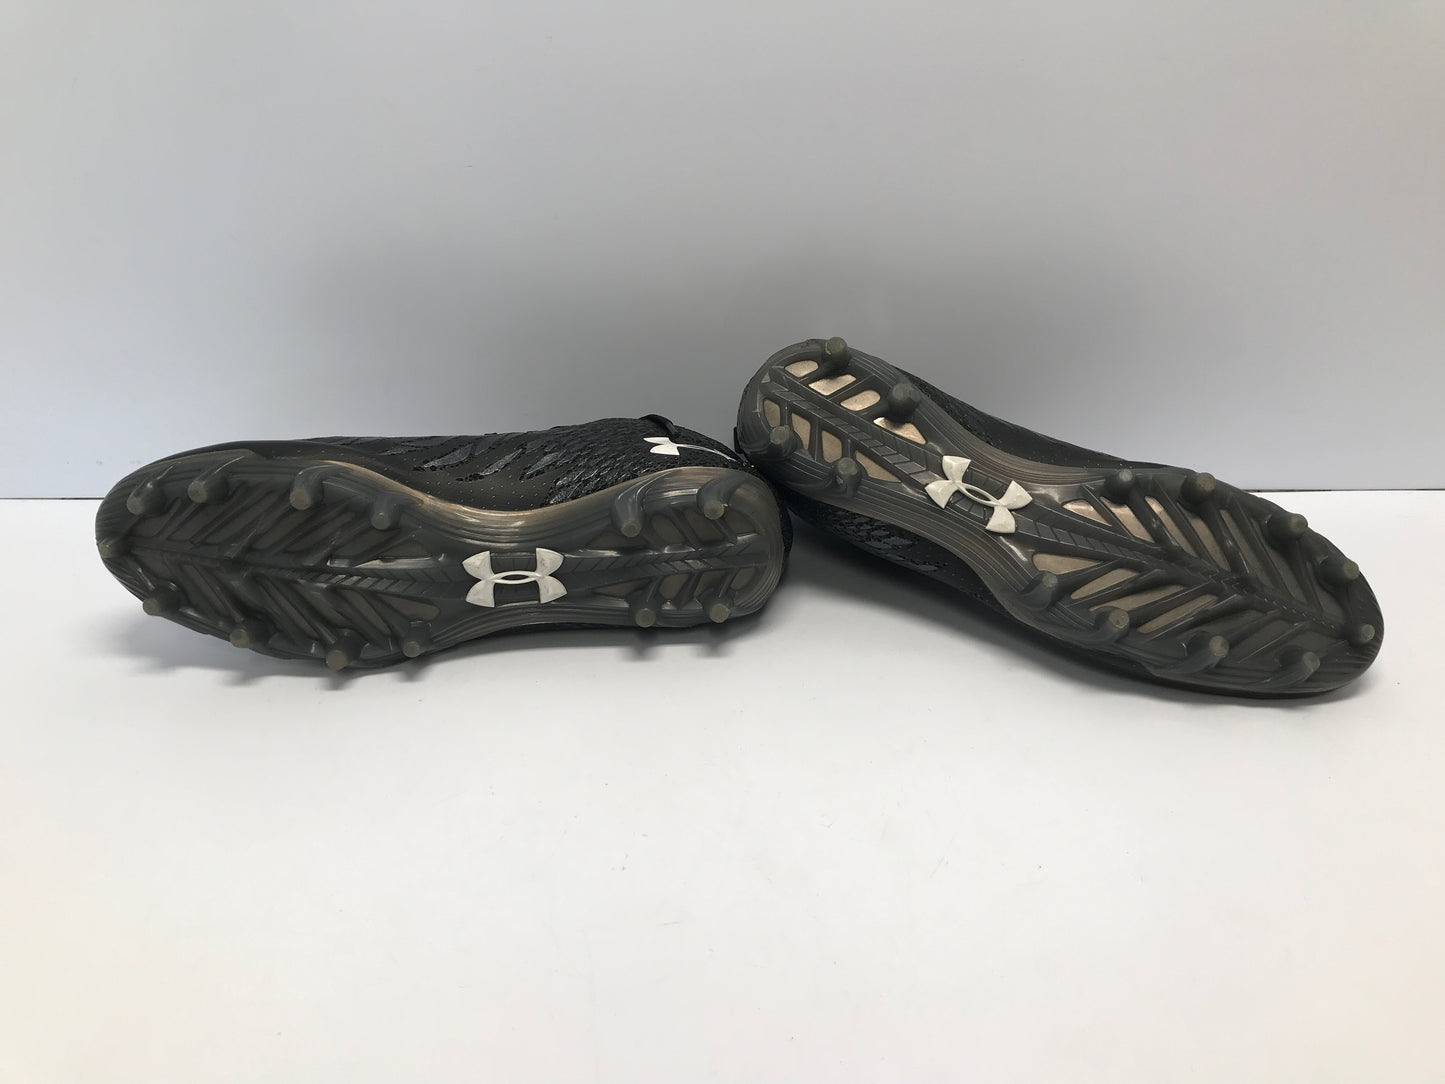 Football Rugby Baseball Soccer Shoes Cleats Men's Size 10 Under Armour Spot Light Black Like New